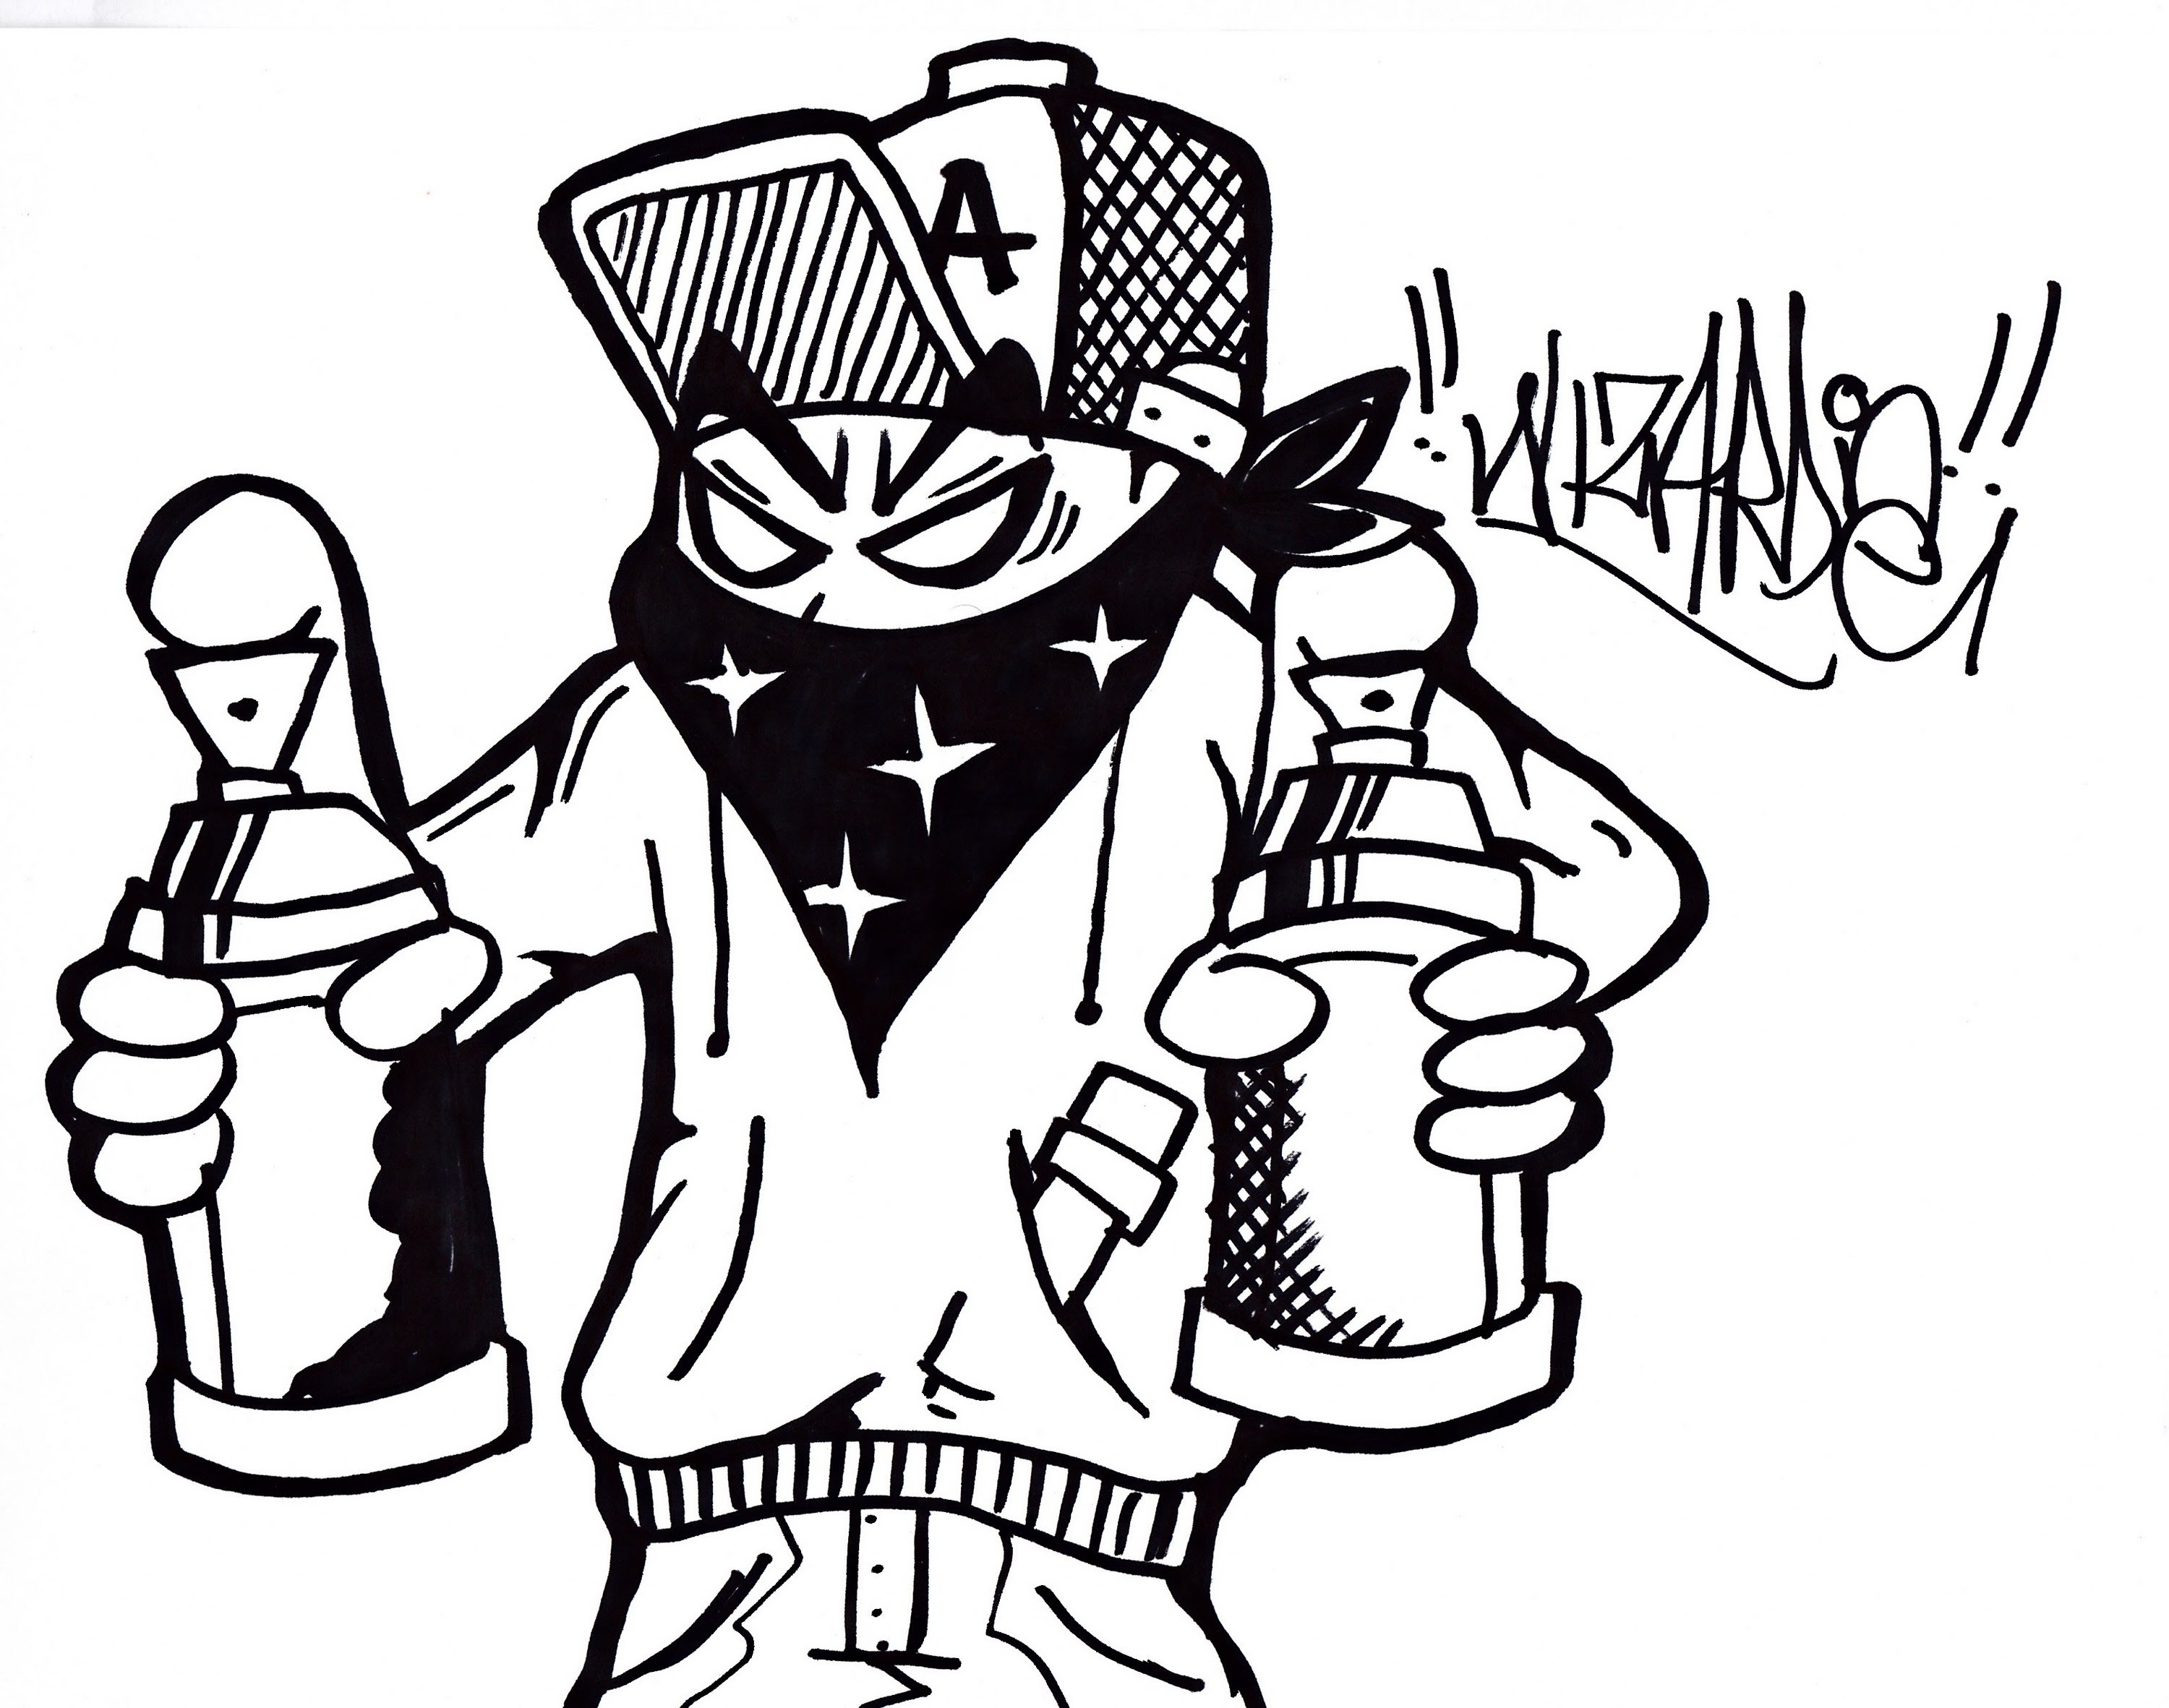 Gangster Cool Coloring Pages For Boys